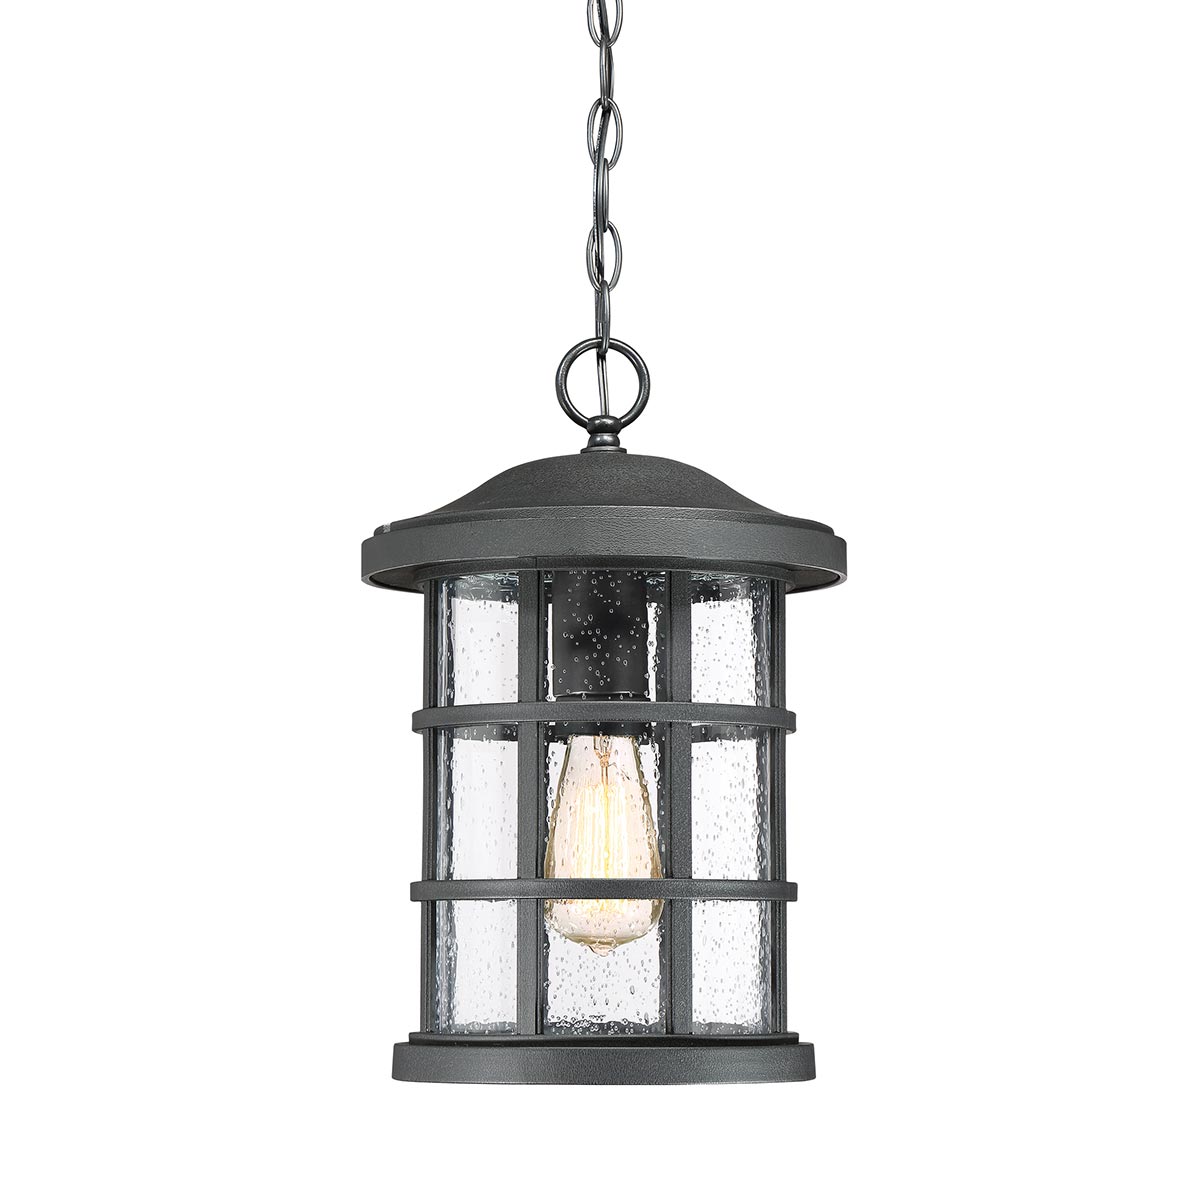 Quoizel Crusade Black 1 Light Outdoor Porch Chain Lantern Seeded Glass